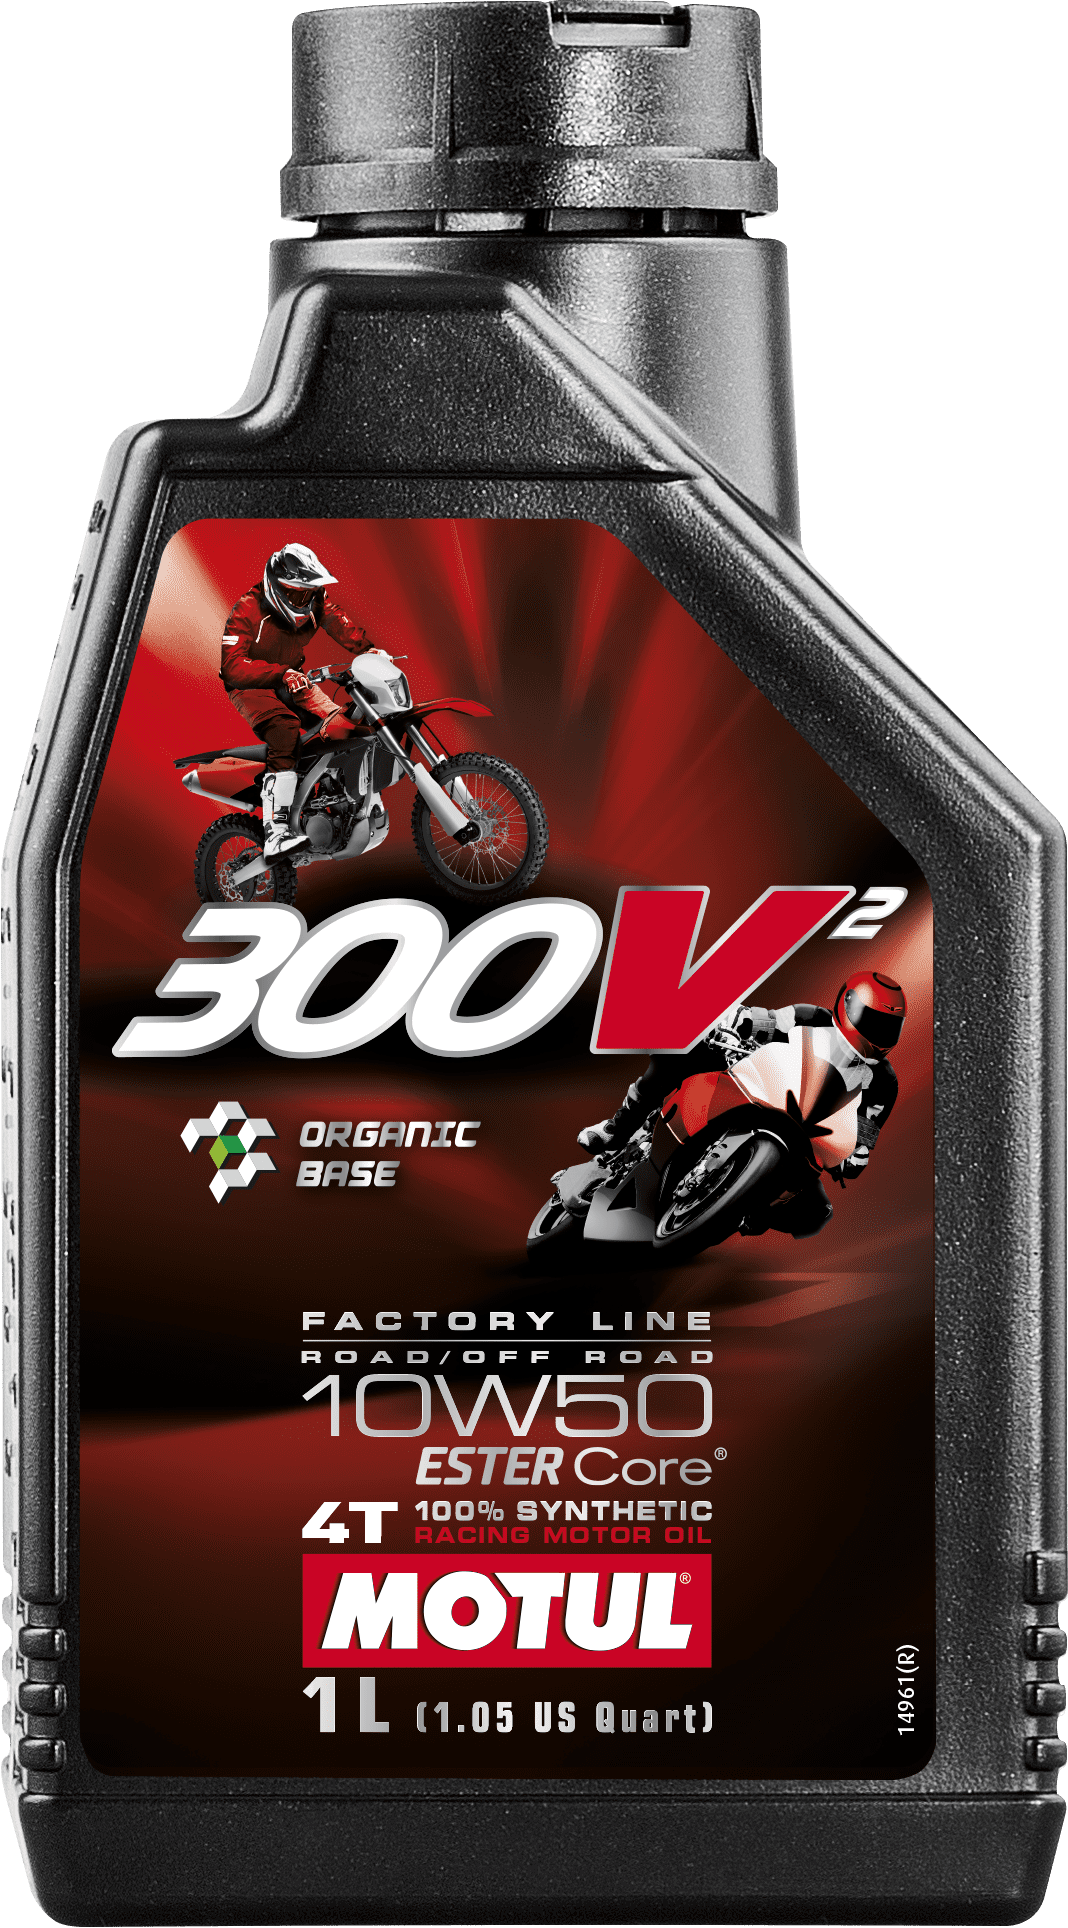 108586-1 100% Synthetic Road and Off-Road 4-Stroke motorcycle racing lubricant developed for Factory Teams. 300V² Factory Line takes advantage of the latest evolutions of the ESTER Core® Technology to ensure maximum engine power output without compromising reliability and wear protection.